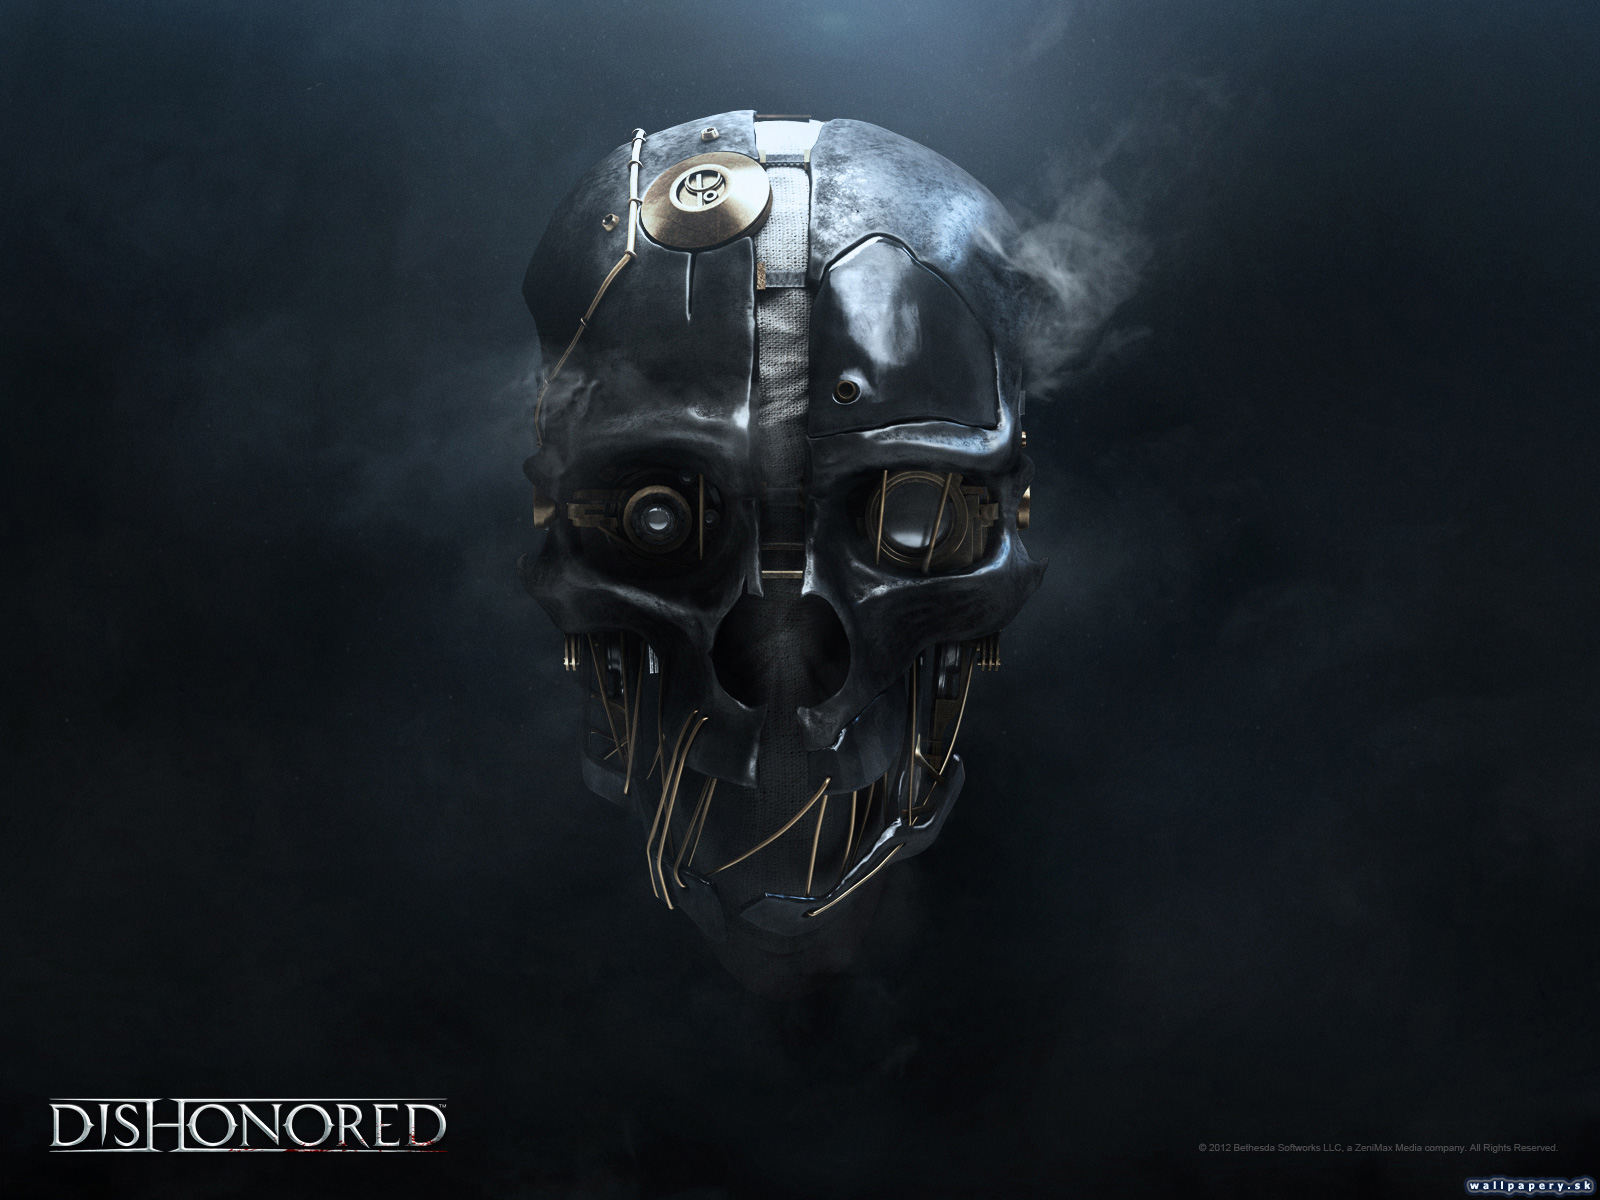 Dishonored - wallpaper 4